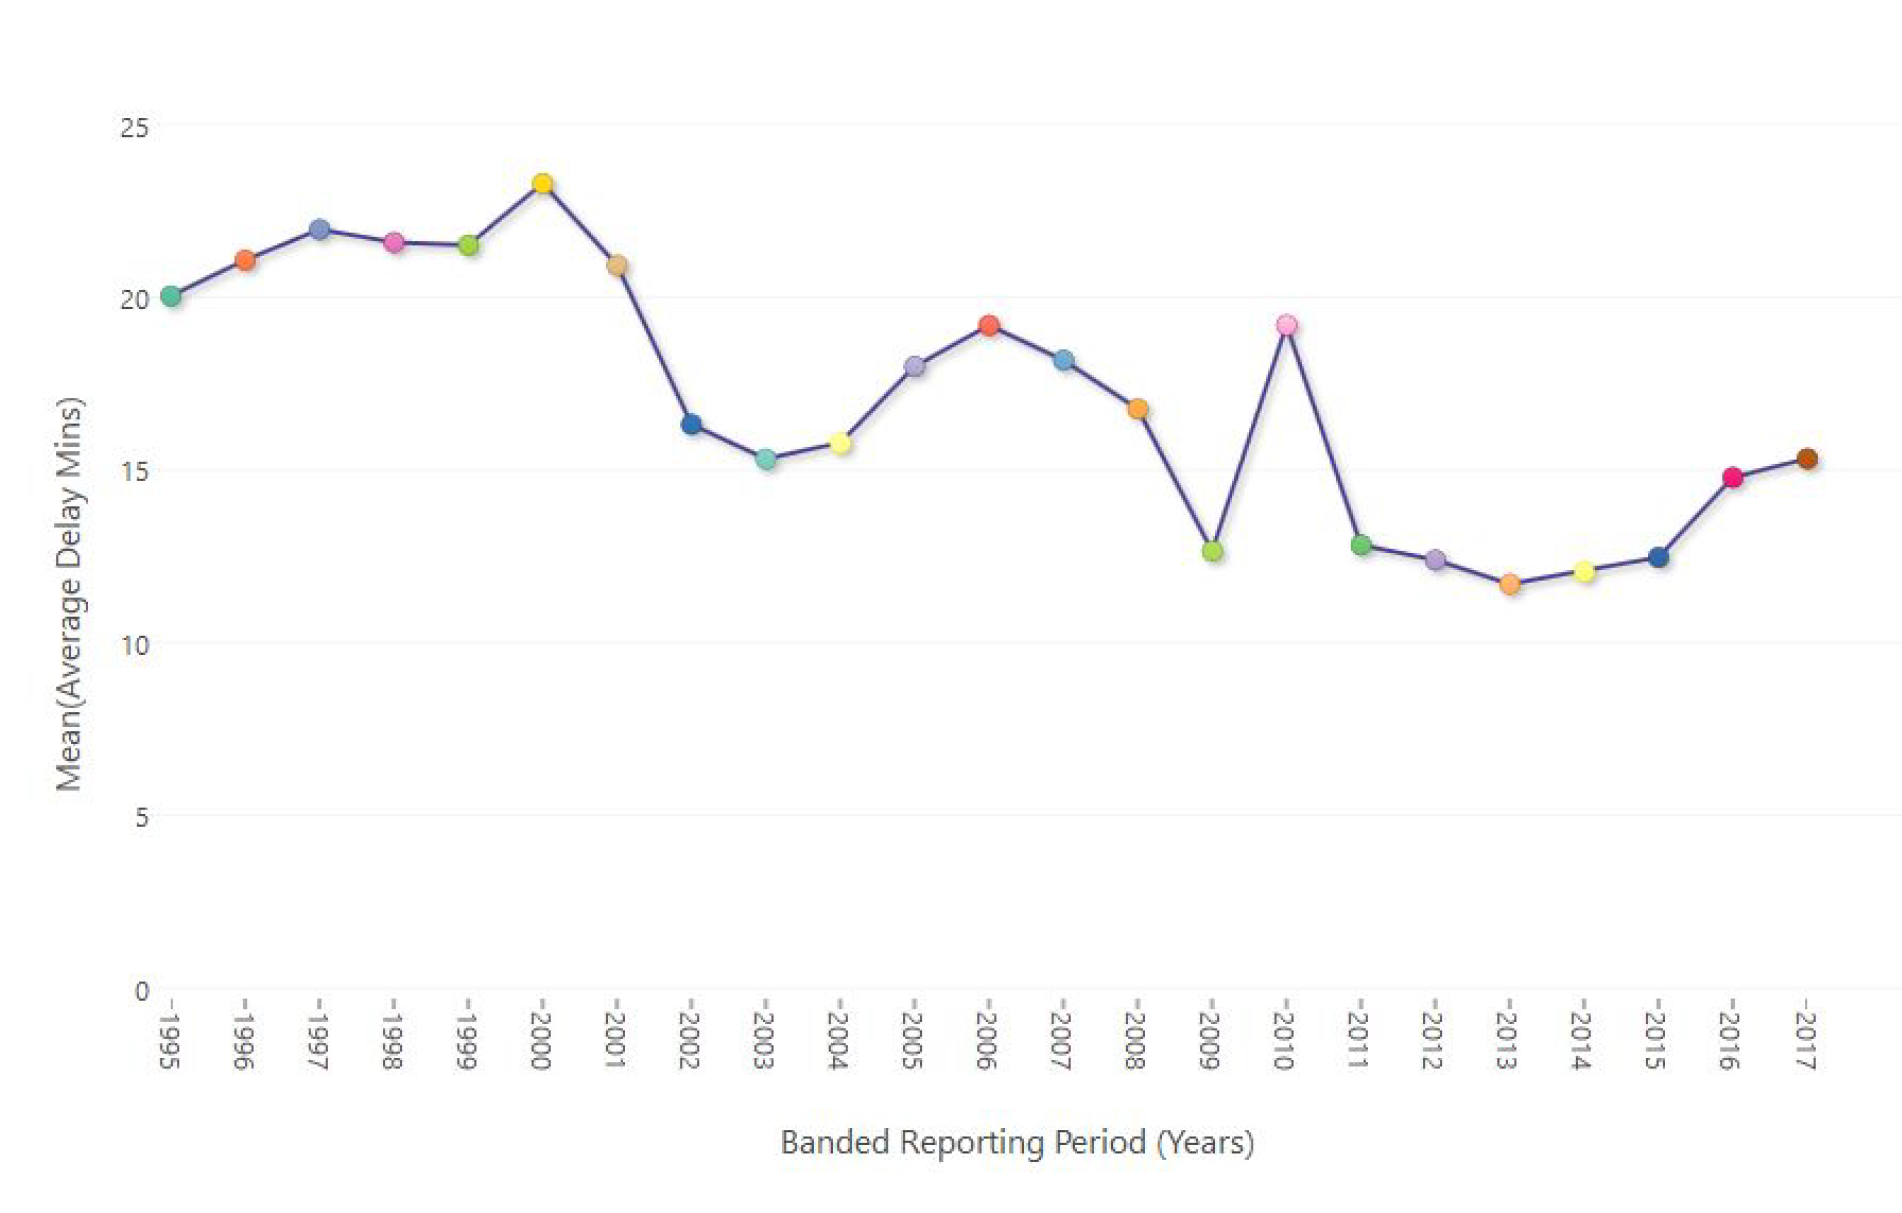 Branded Reporting Period (Years)